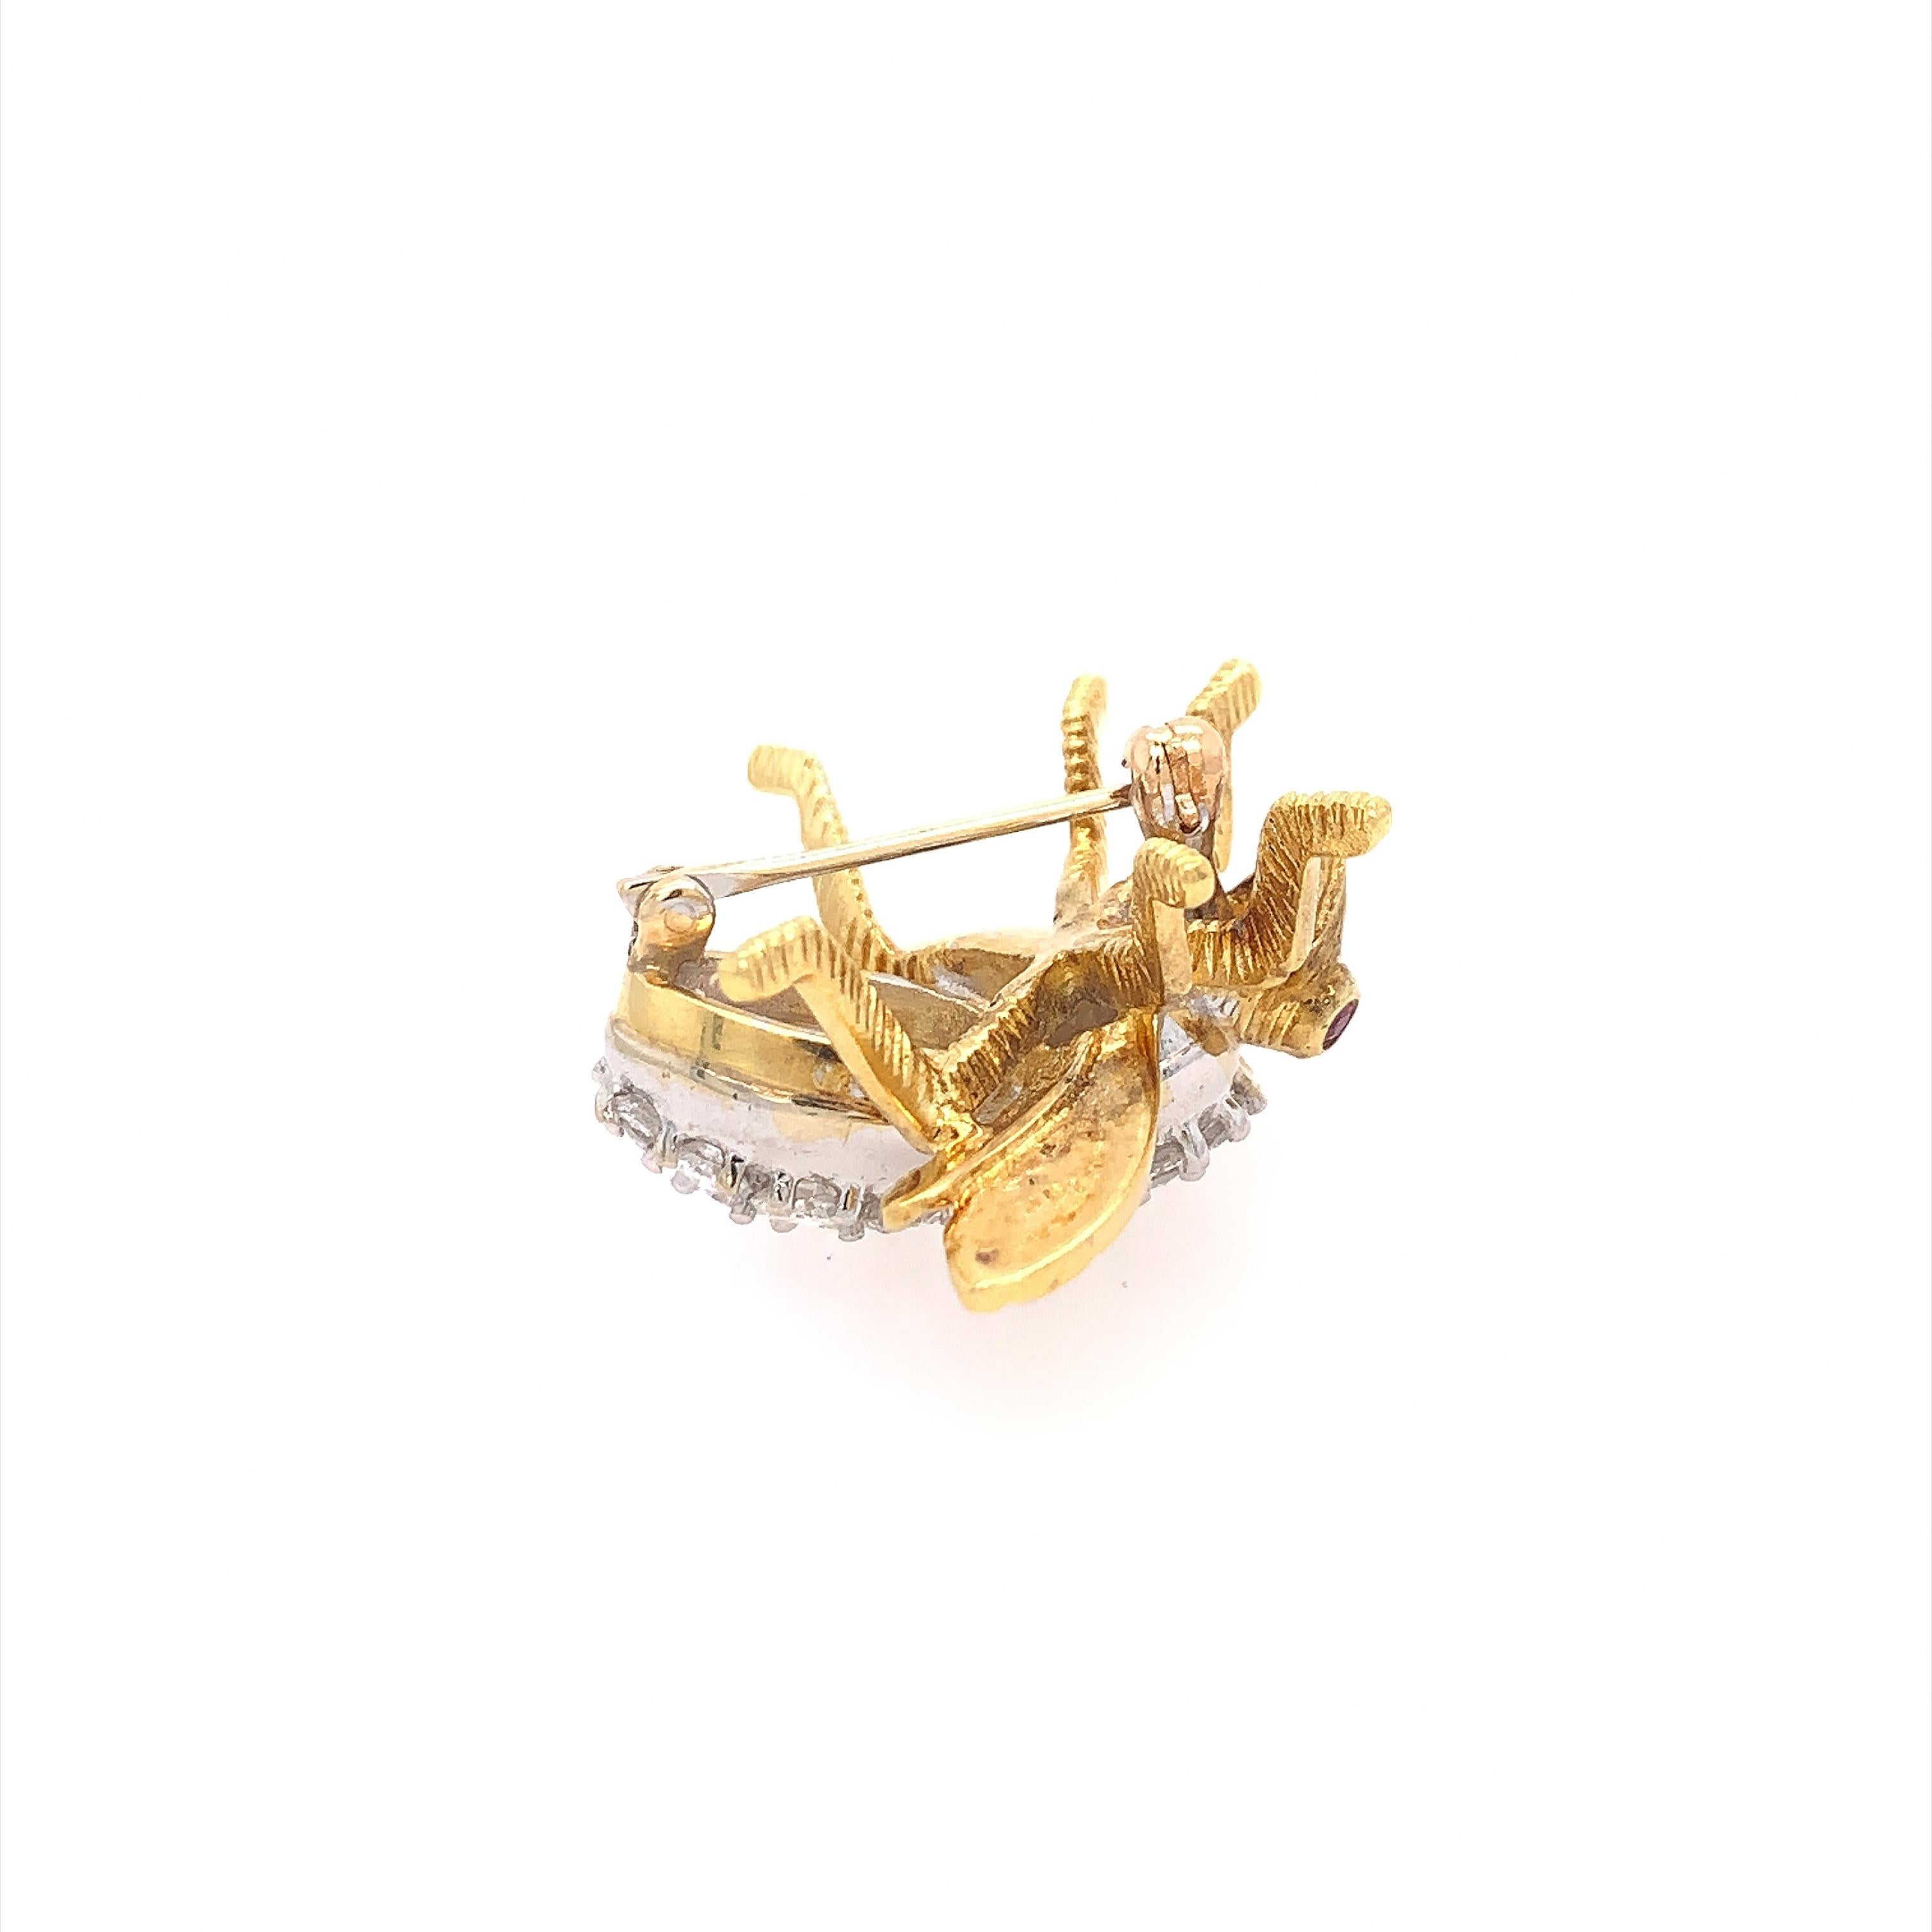 Vintage Herbert Rosenthal 2.00 Carat Diamond and 18k Gold Bee Brooch In Excellent Condition For Sale In Delray Beach, FL